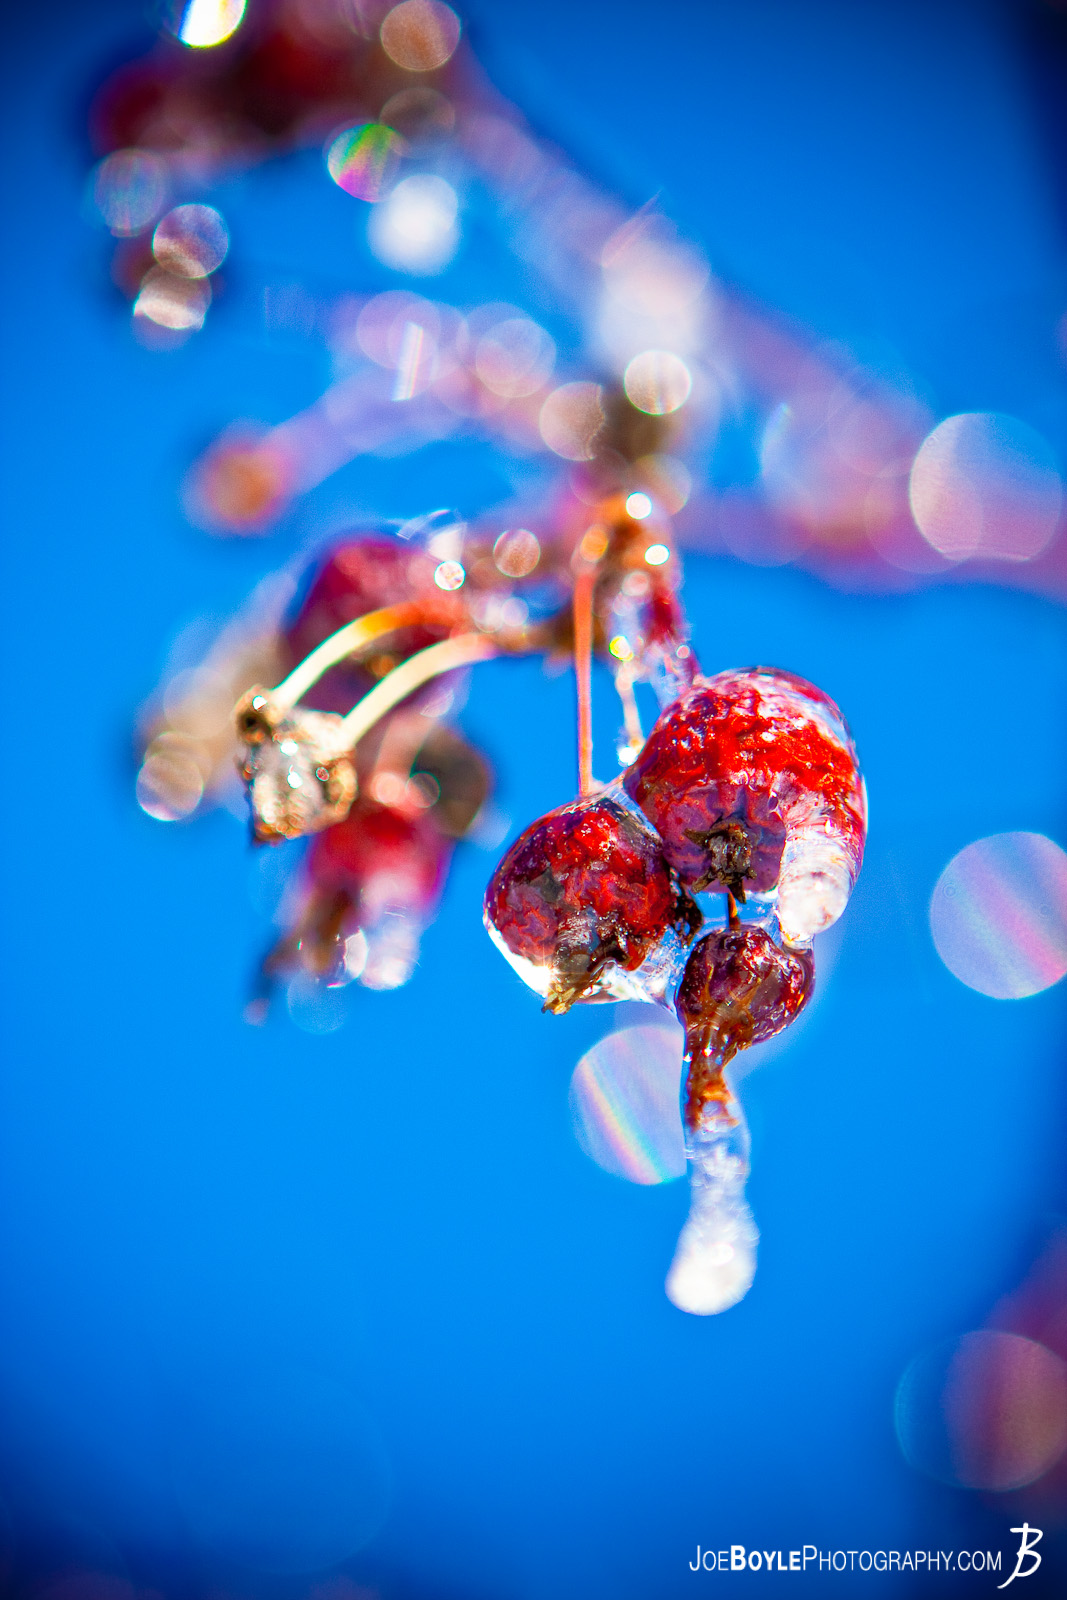  I captured this photo after an ice storm came through the Cleveland area. The storm provided some great picture opportunities that I was able to capture the following day including this Crabapple tree coated in ice! 